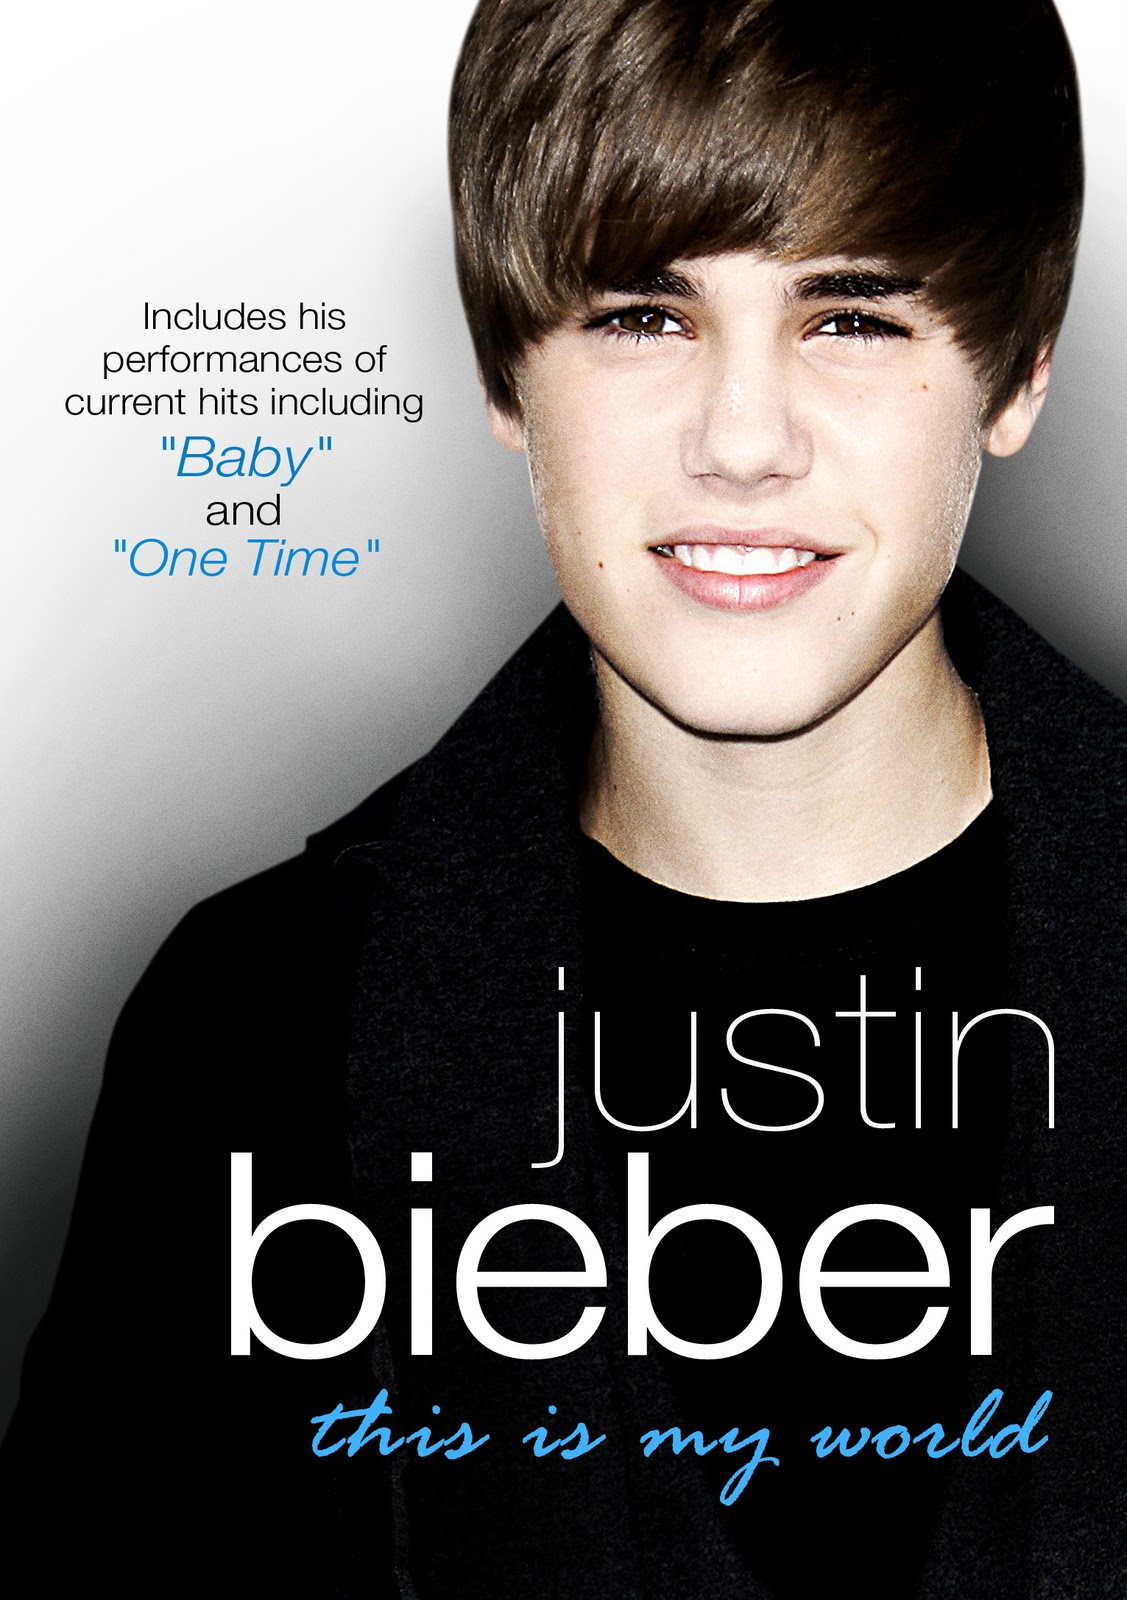 To celebrate the November 29th DVD release of Justin Bieber : This is my